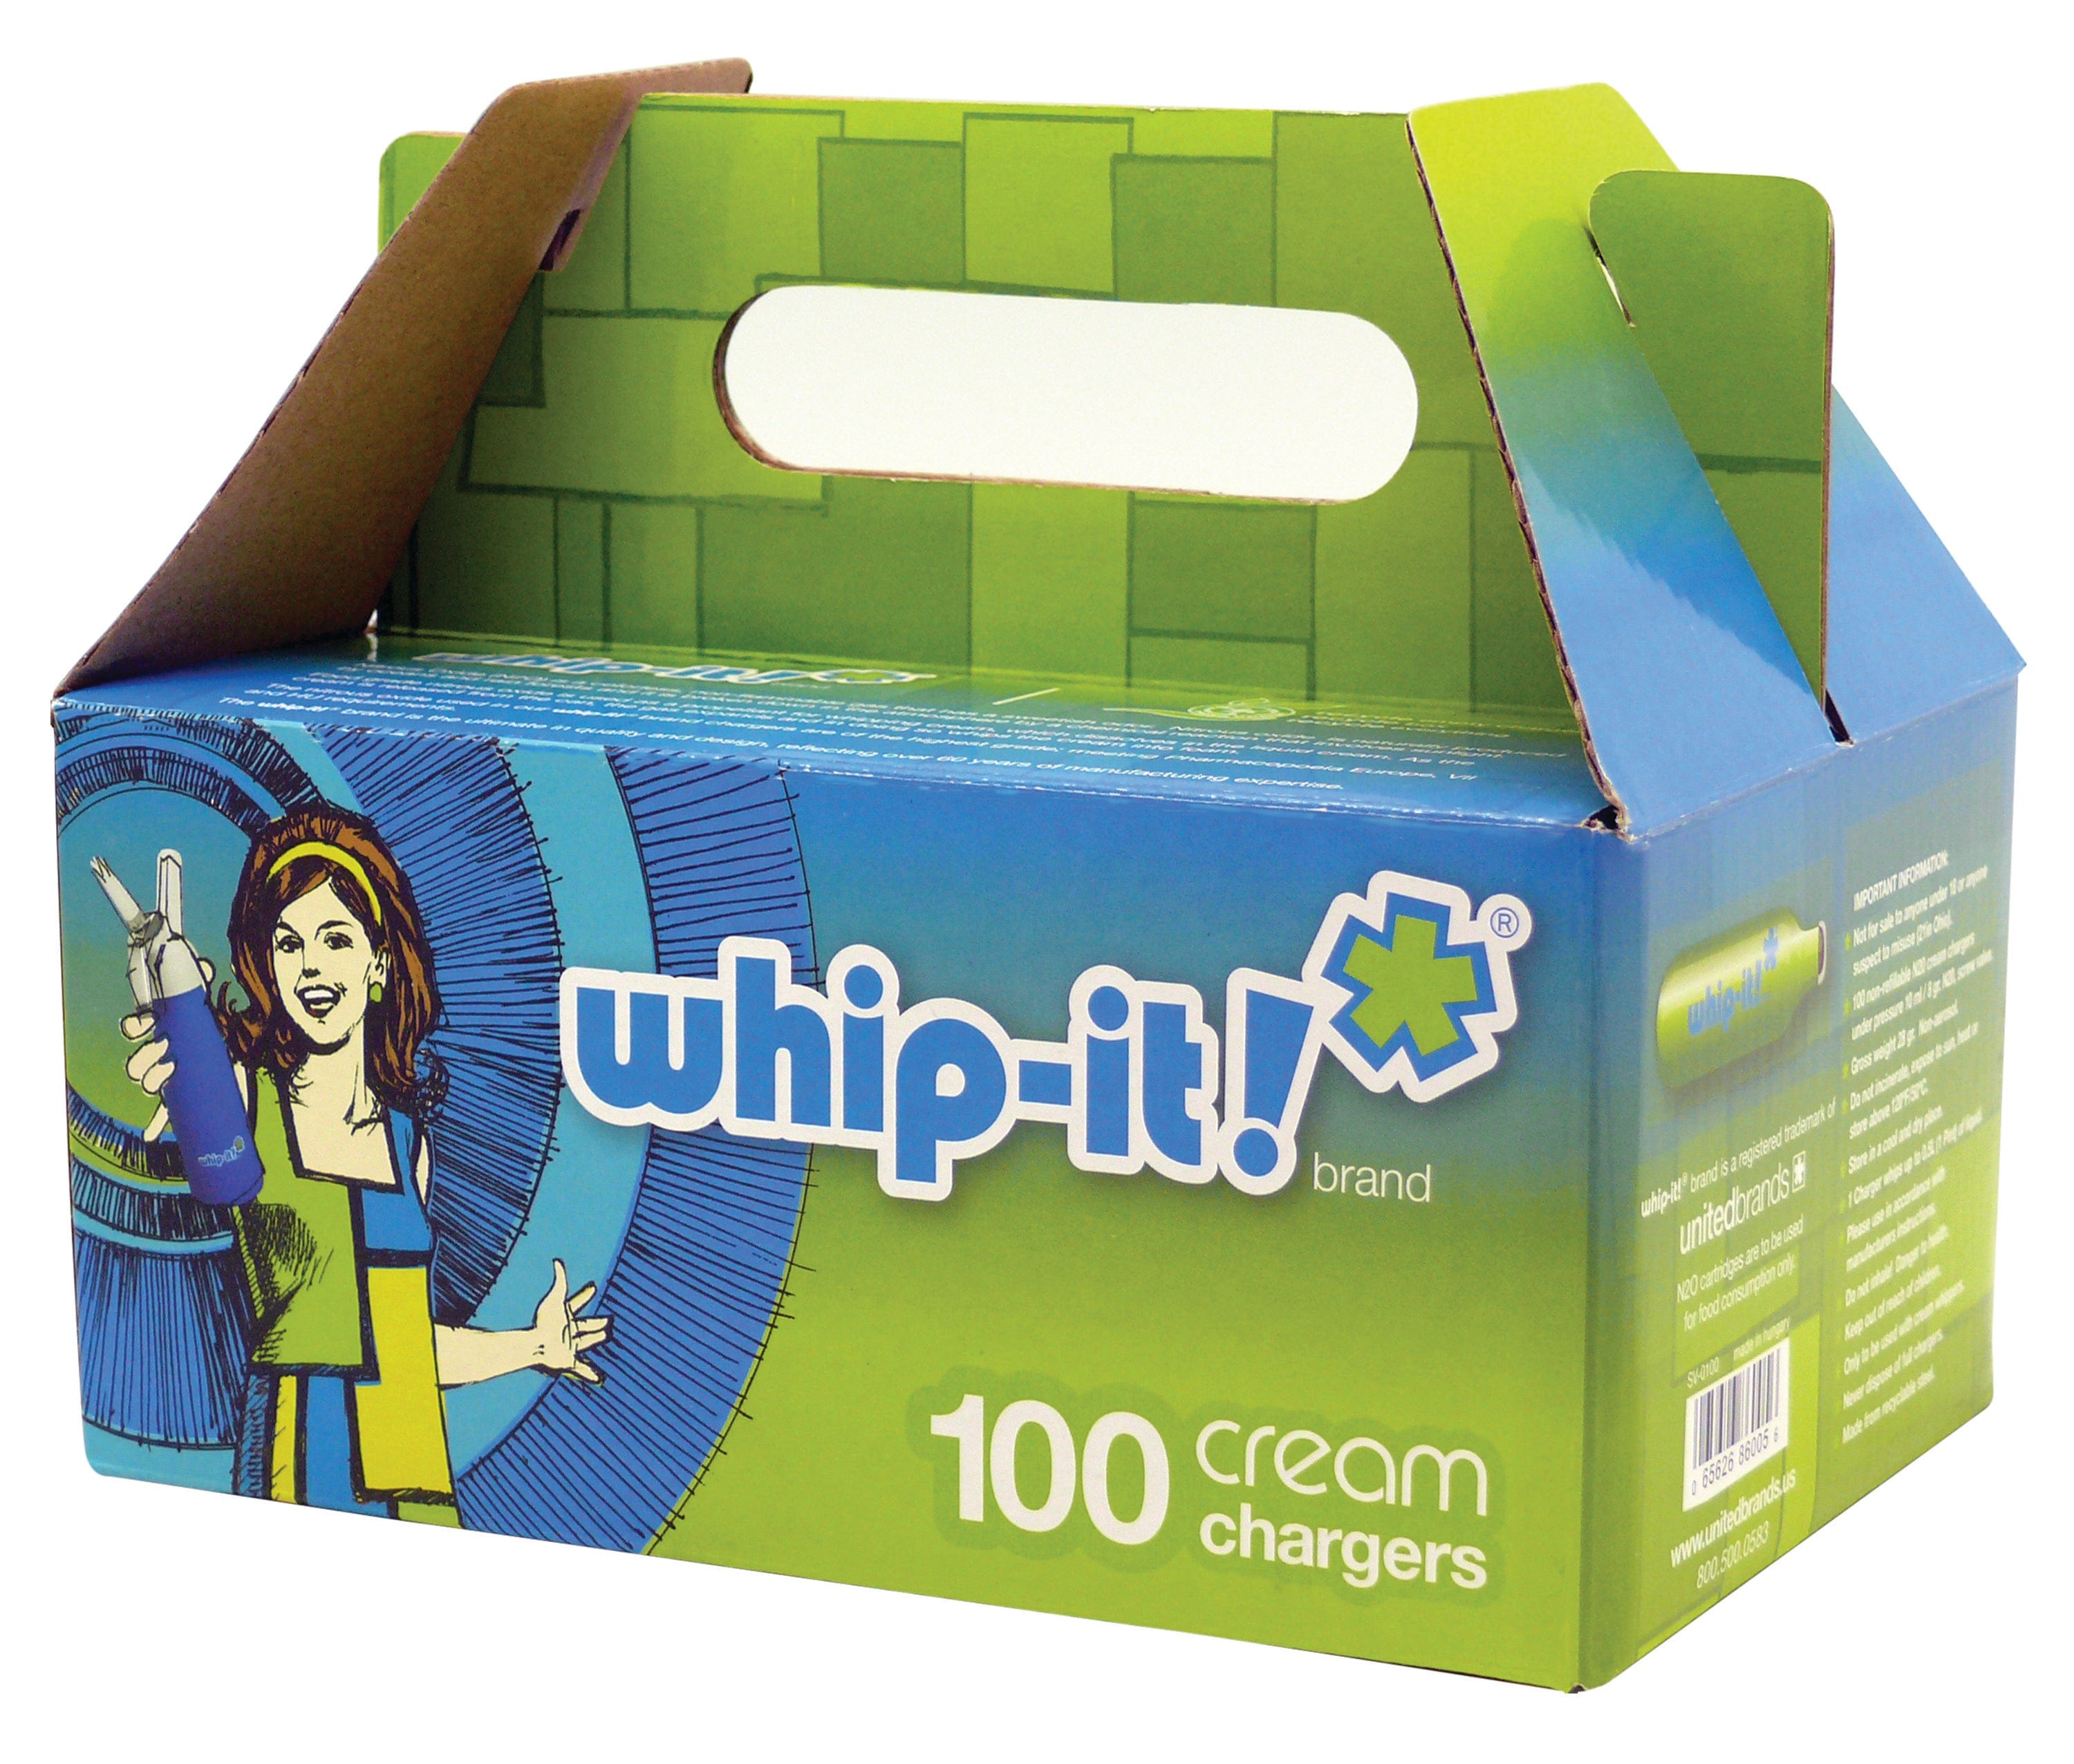 Whip-It! Cream Chargers - 100pks